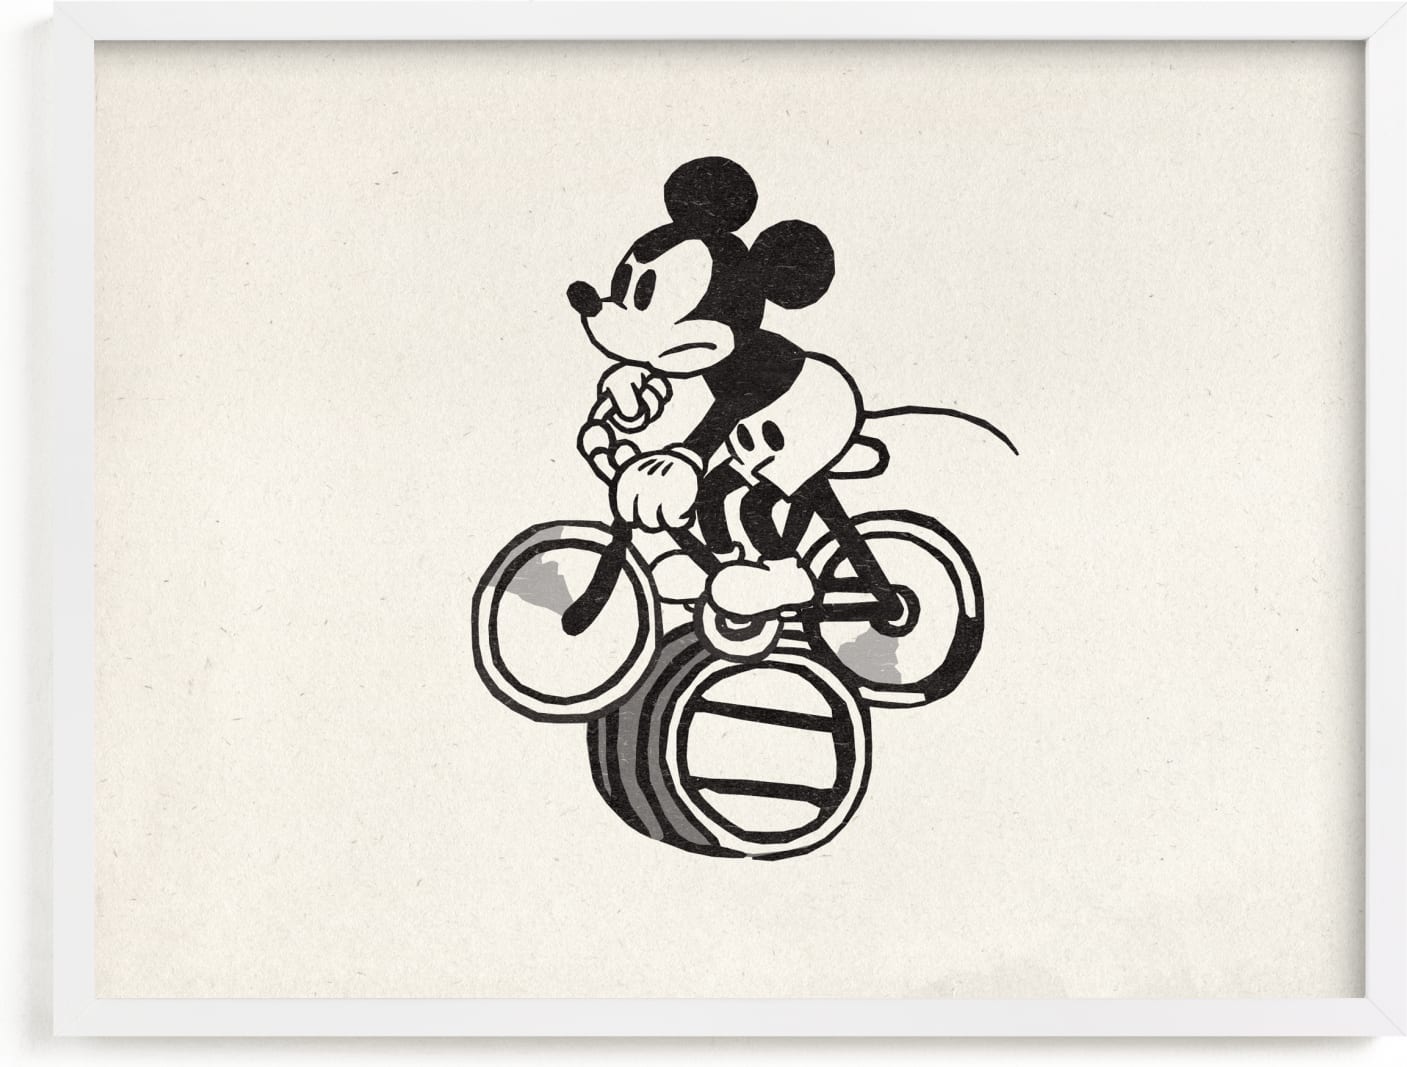 This is a black and white disney art by Sumak Studio called Disney's Mickey Mouse Riding A Bicycle.